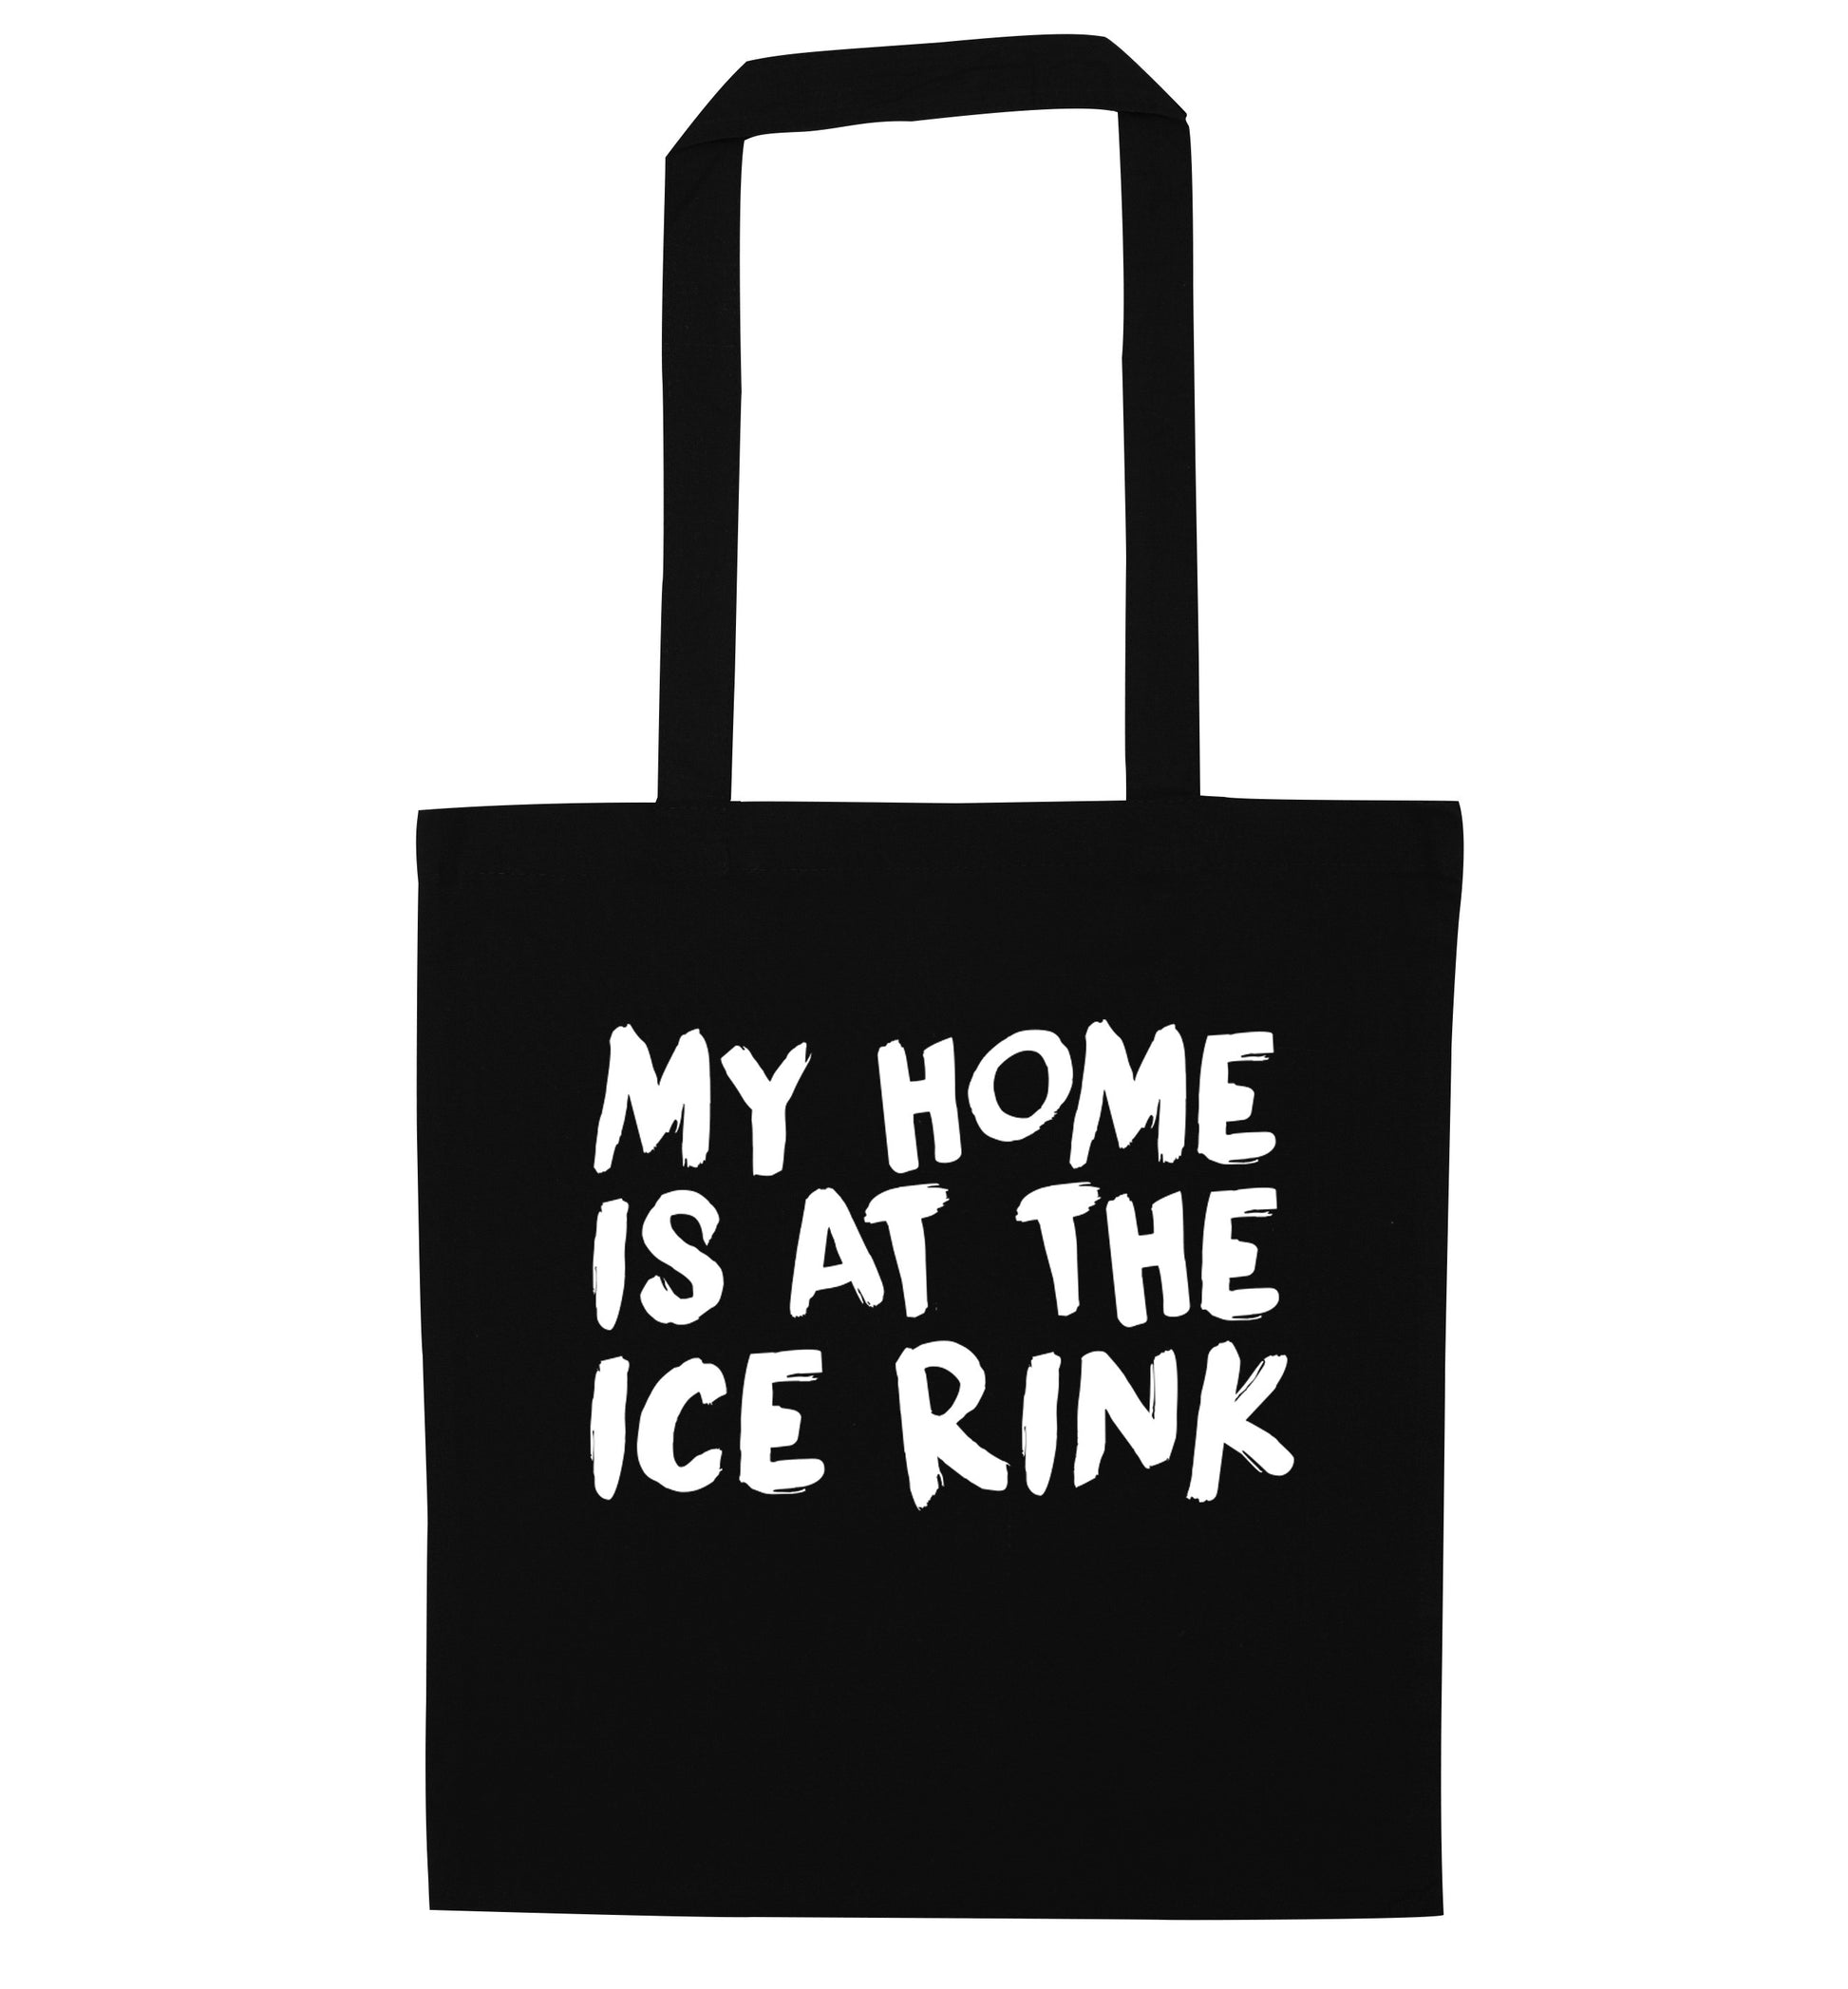 My home is at the ice rink black tote bag